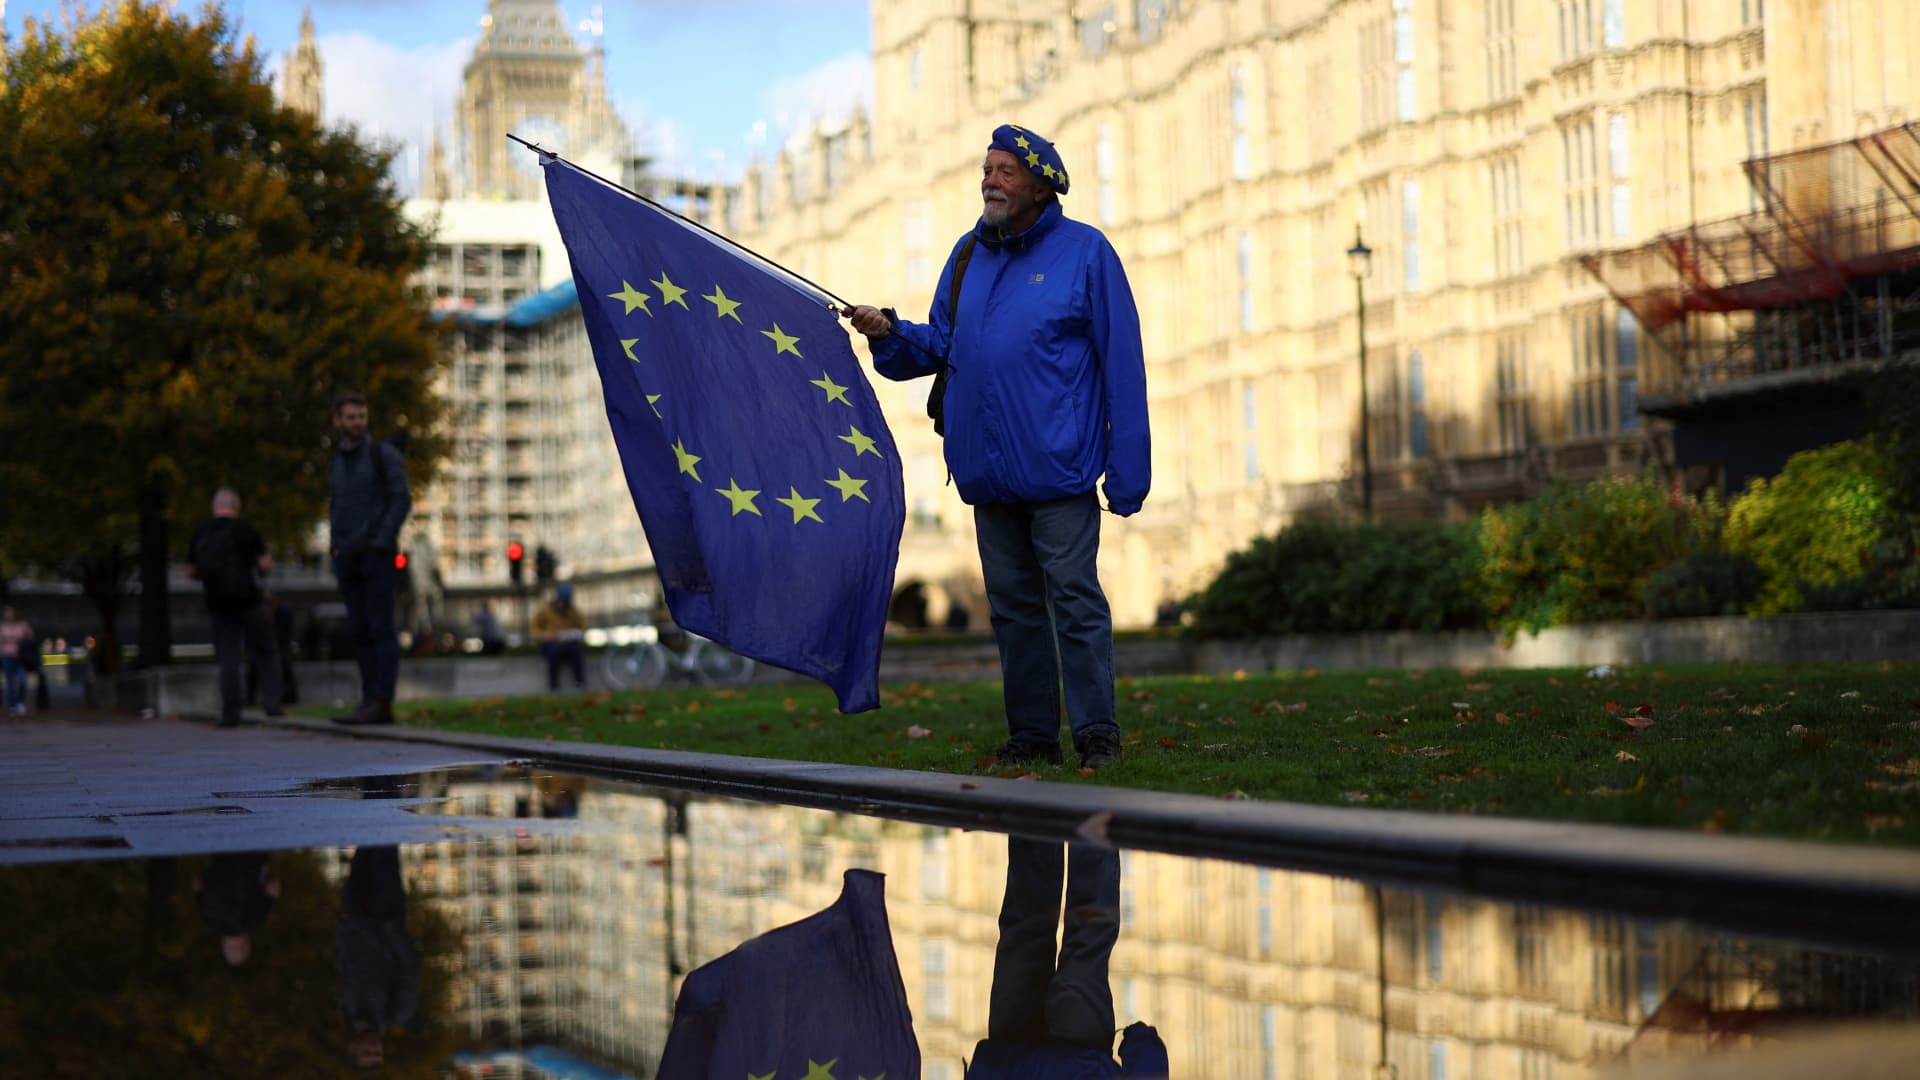 A pro-European Union protestor holds a EU flag outside the Houses of Parliament, in London, Britain October 20, 2022.